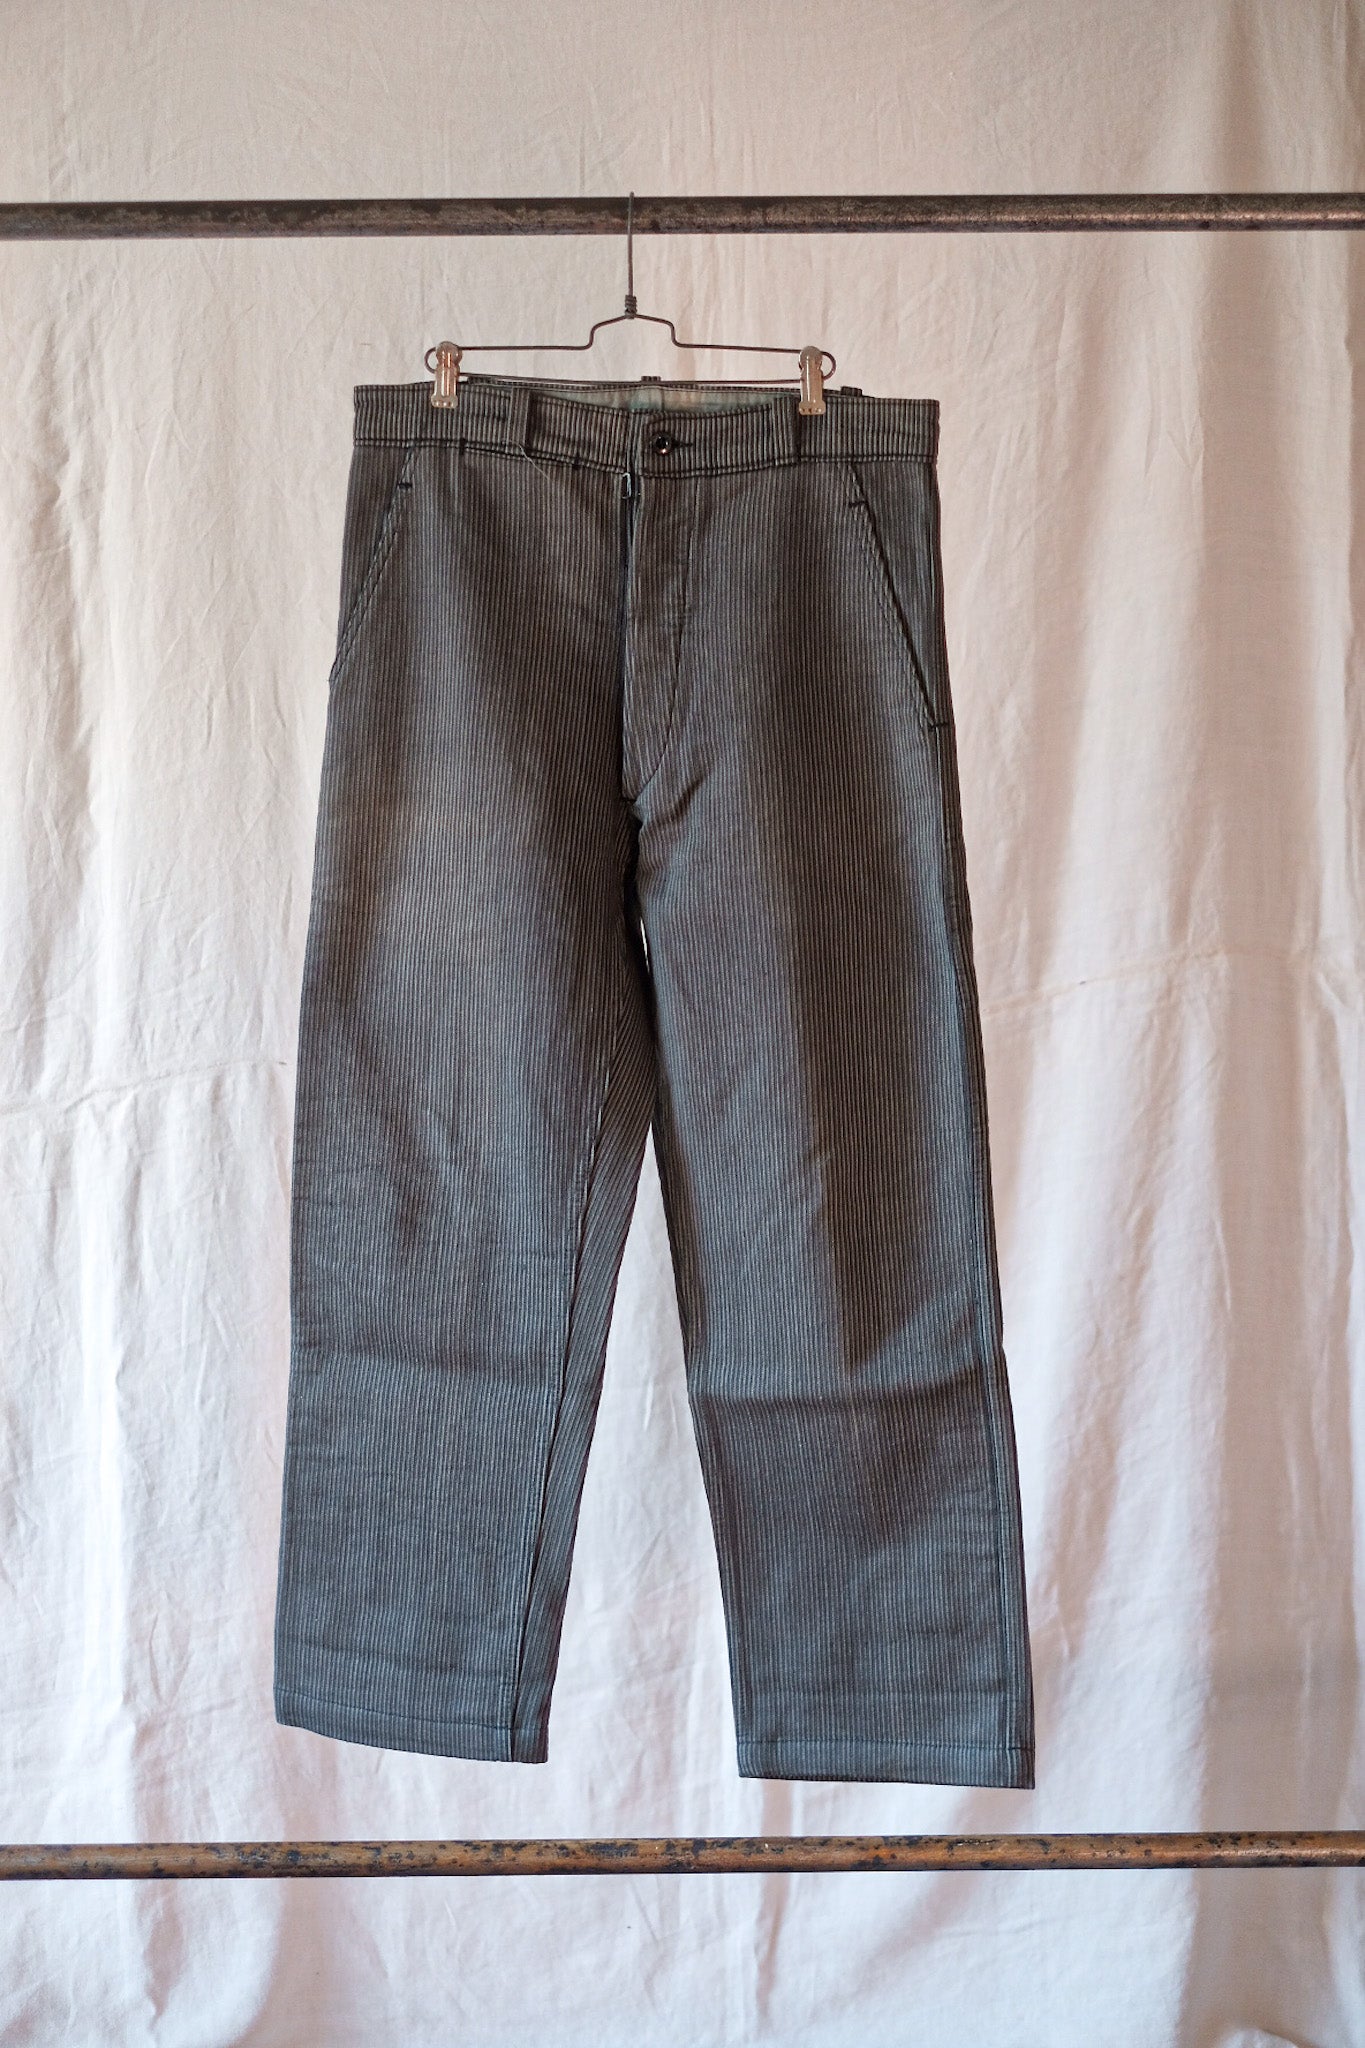 [~ 40's] French Vintage Gray Cotton Pique Work Pants